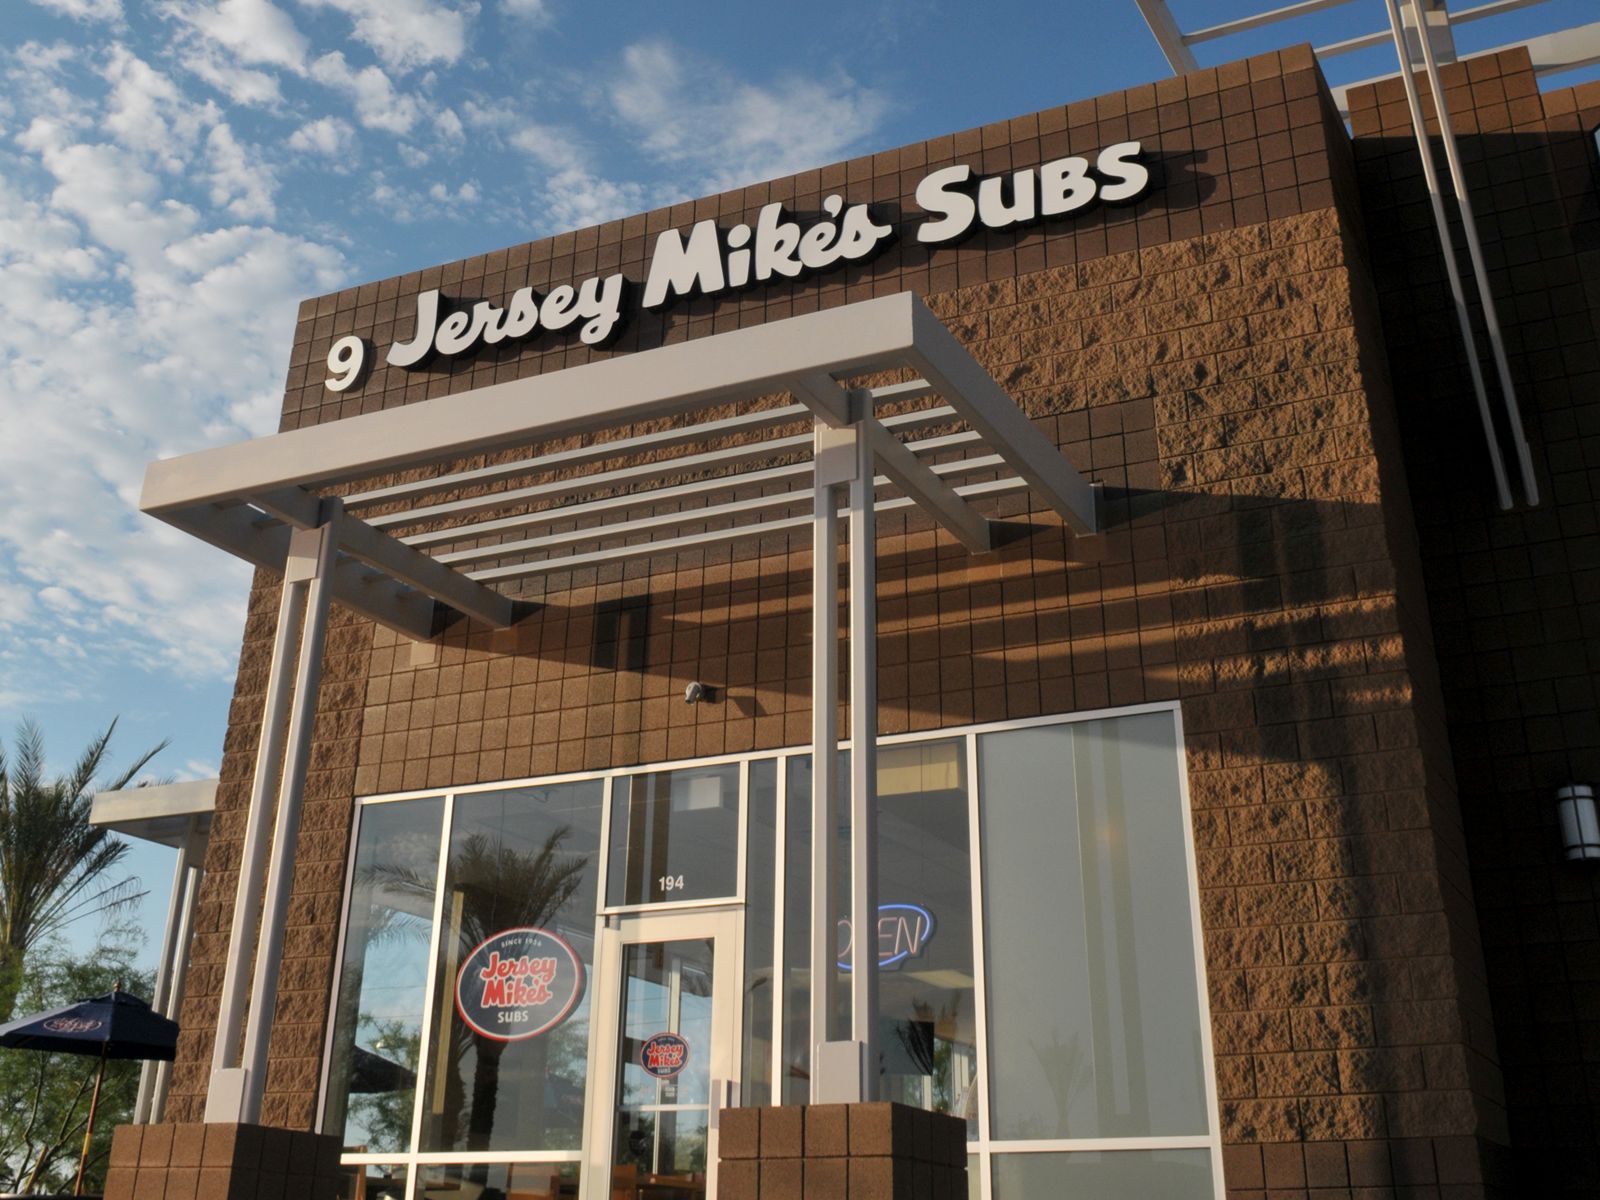 Jersey Mike's Adds To Real Estate Team To Help Fuel Aggressive Growth In 2018